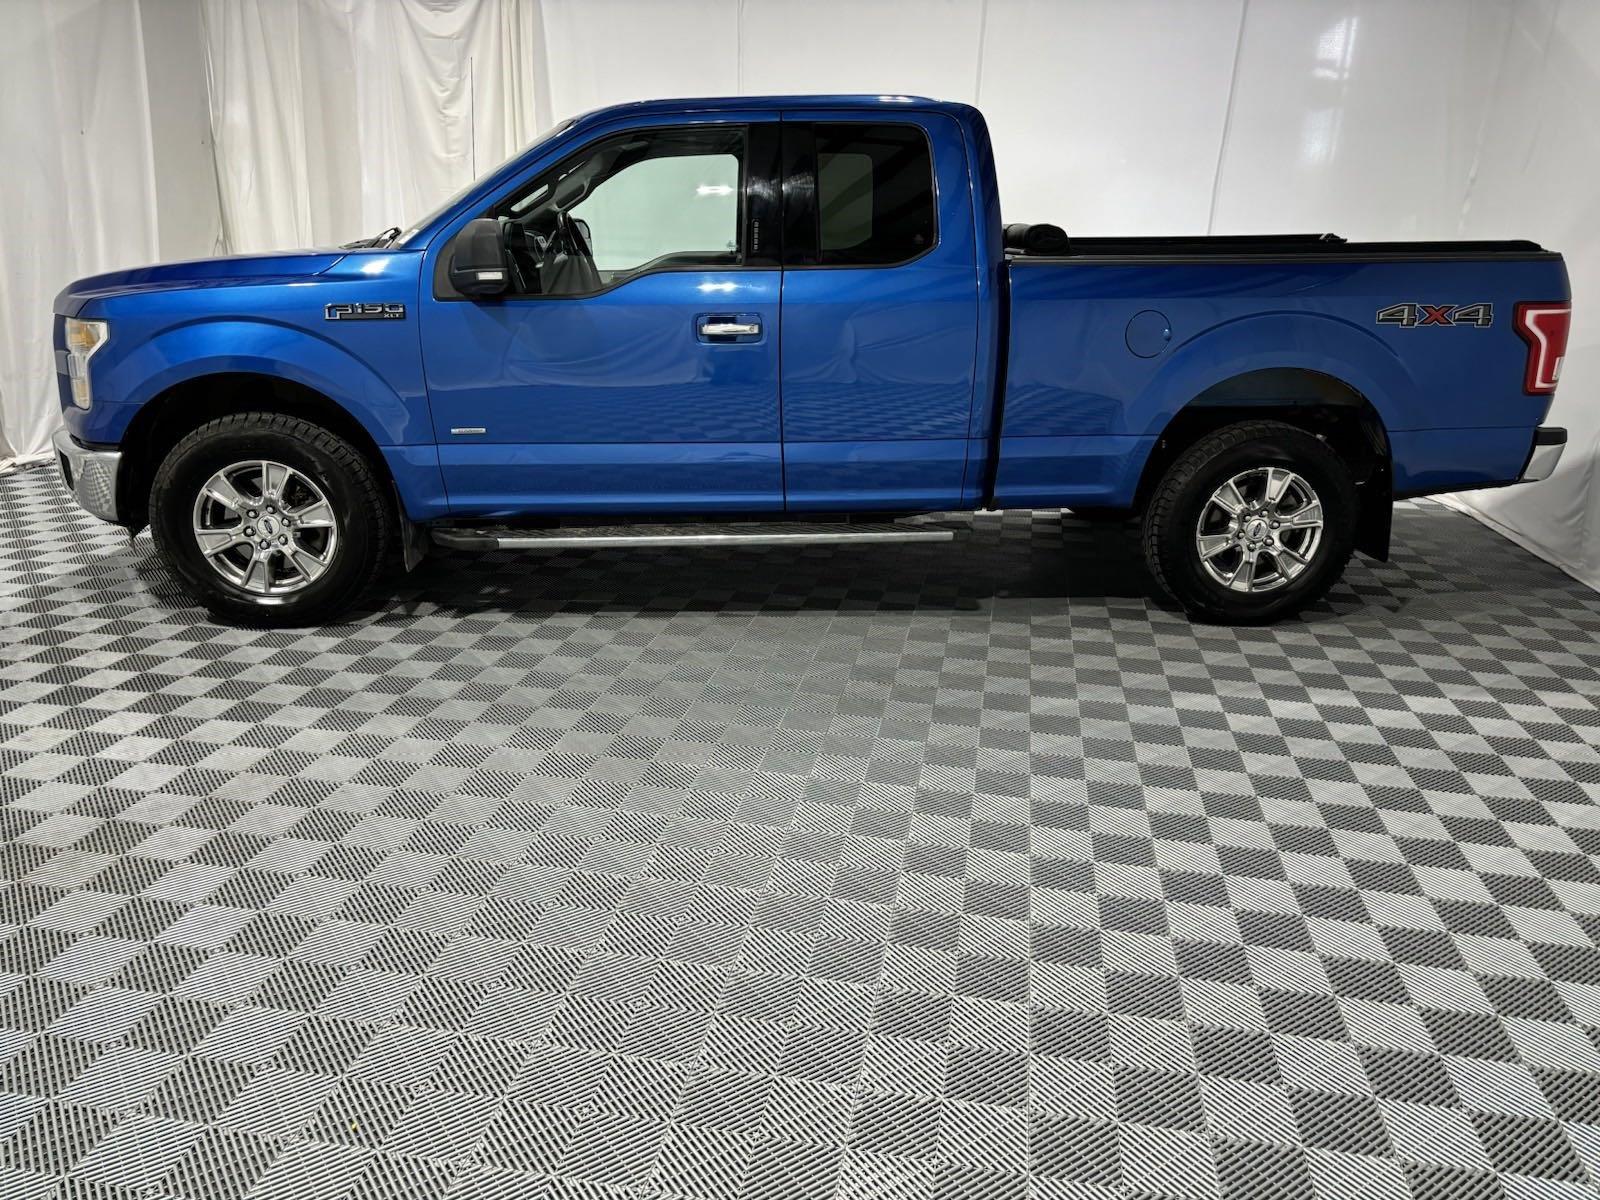 Used 2015 Ford F-150 XLT SuperCab Styleside for sale in St Joseph MO